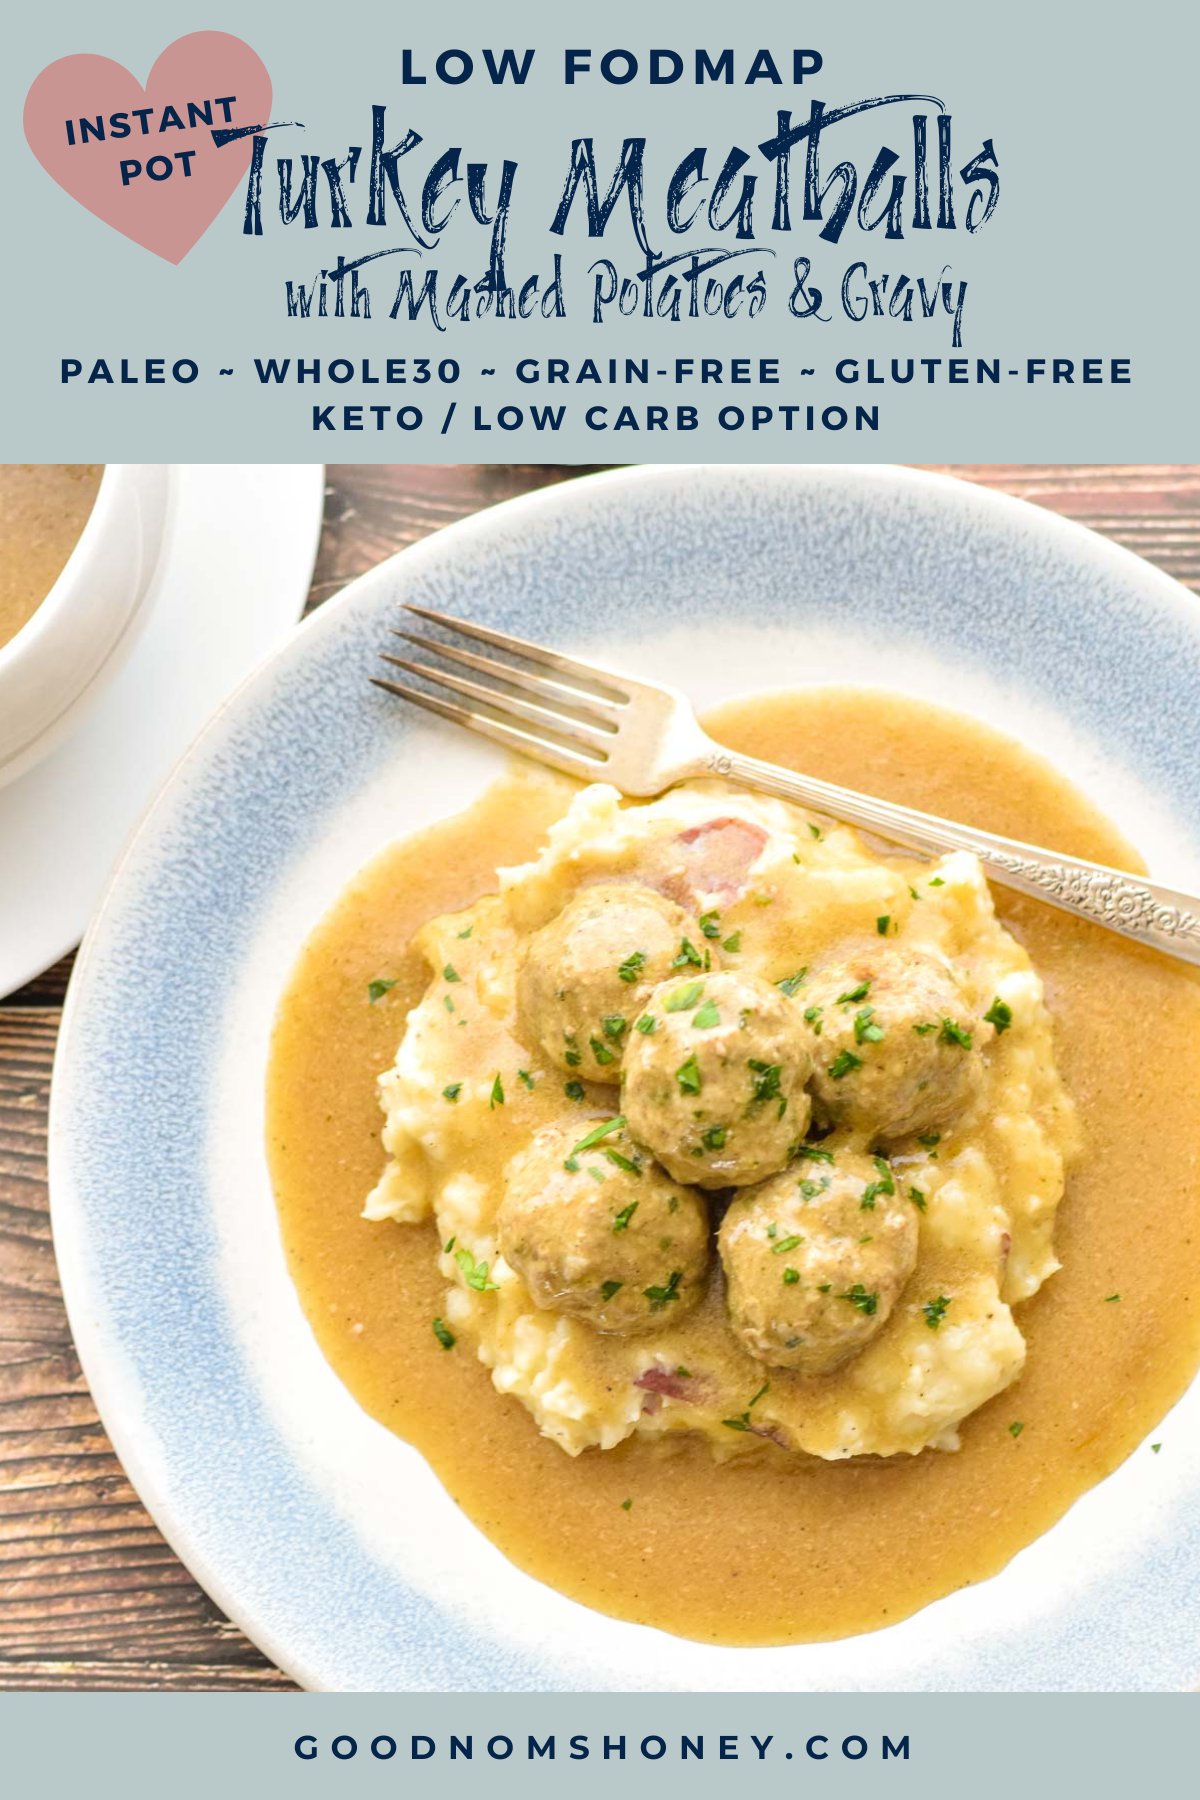 pinterest image with low fodmap instant pot turkey meatballs paleo whole30 grain-free gluten-free keto / low carb option at the top and goodnomshoney.com at the bottom